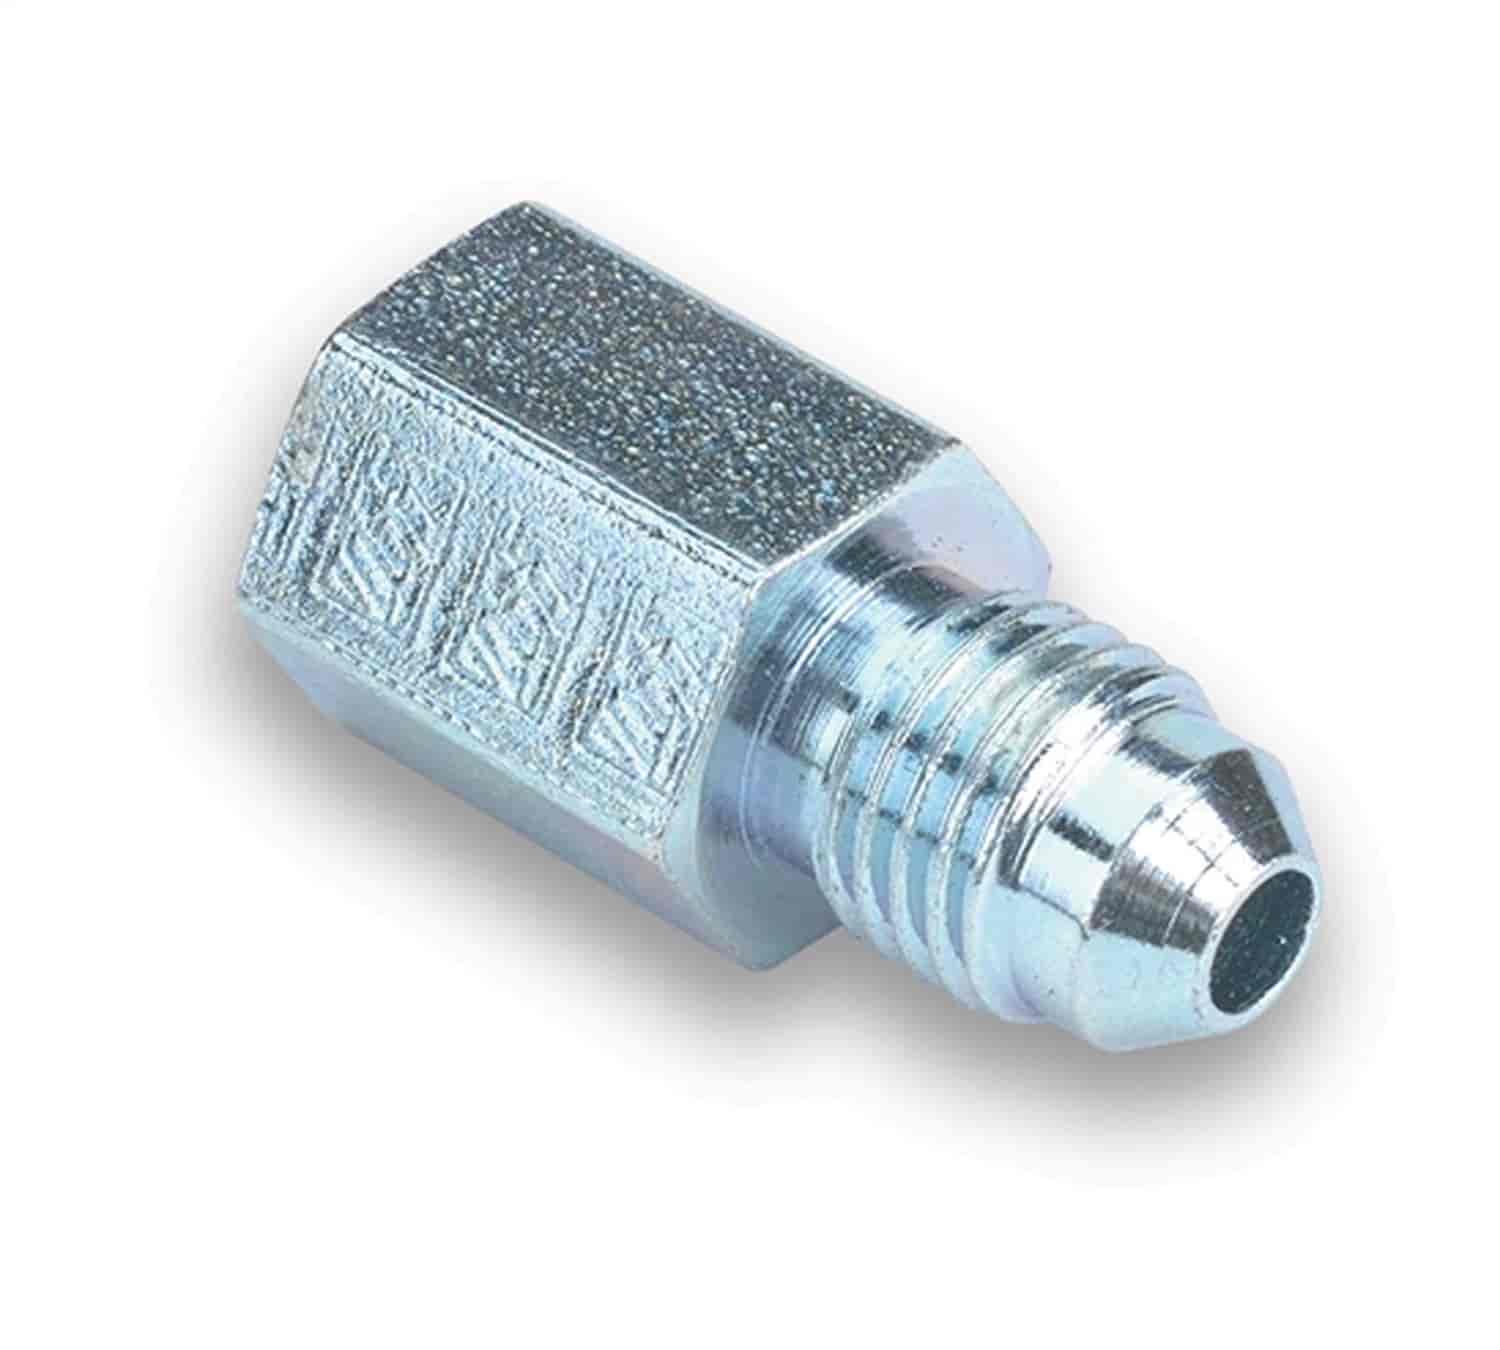 NPT to BSPT Straight Adapter  1/8" NPT Male to 1/8" BSPT Male